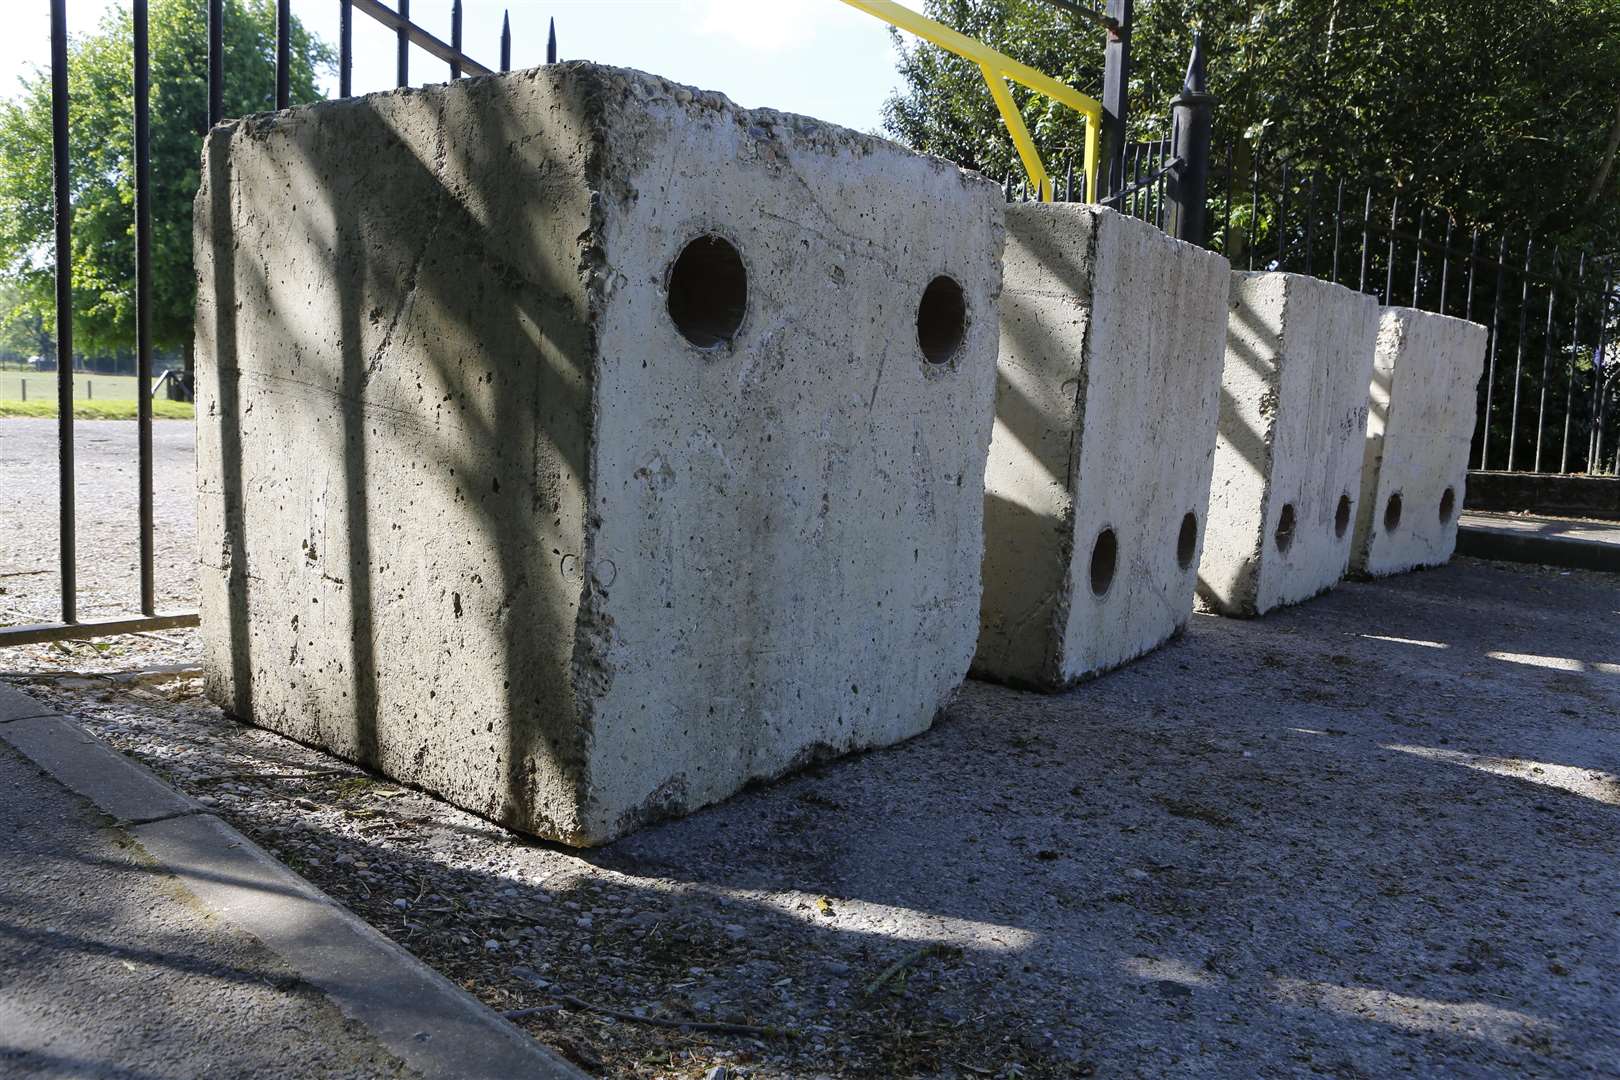 Concrete blocks have been put in front of the gate